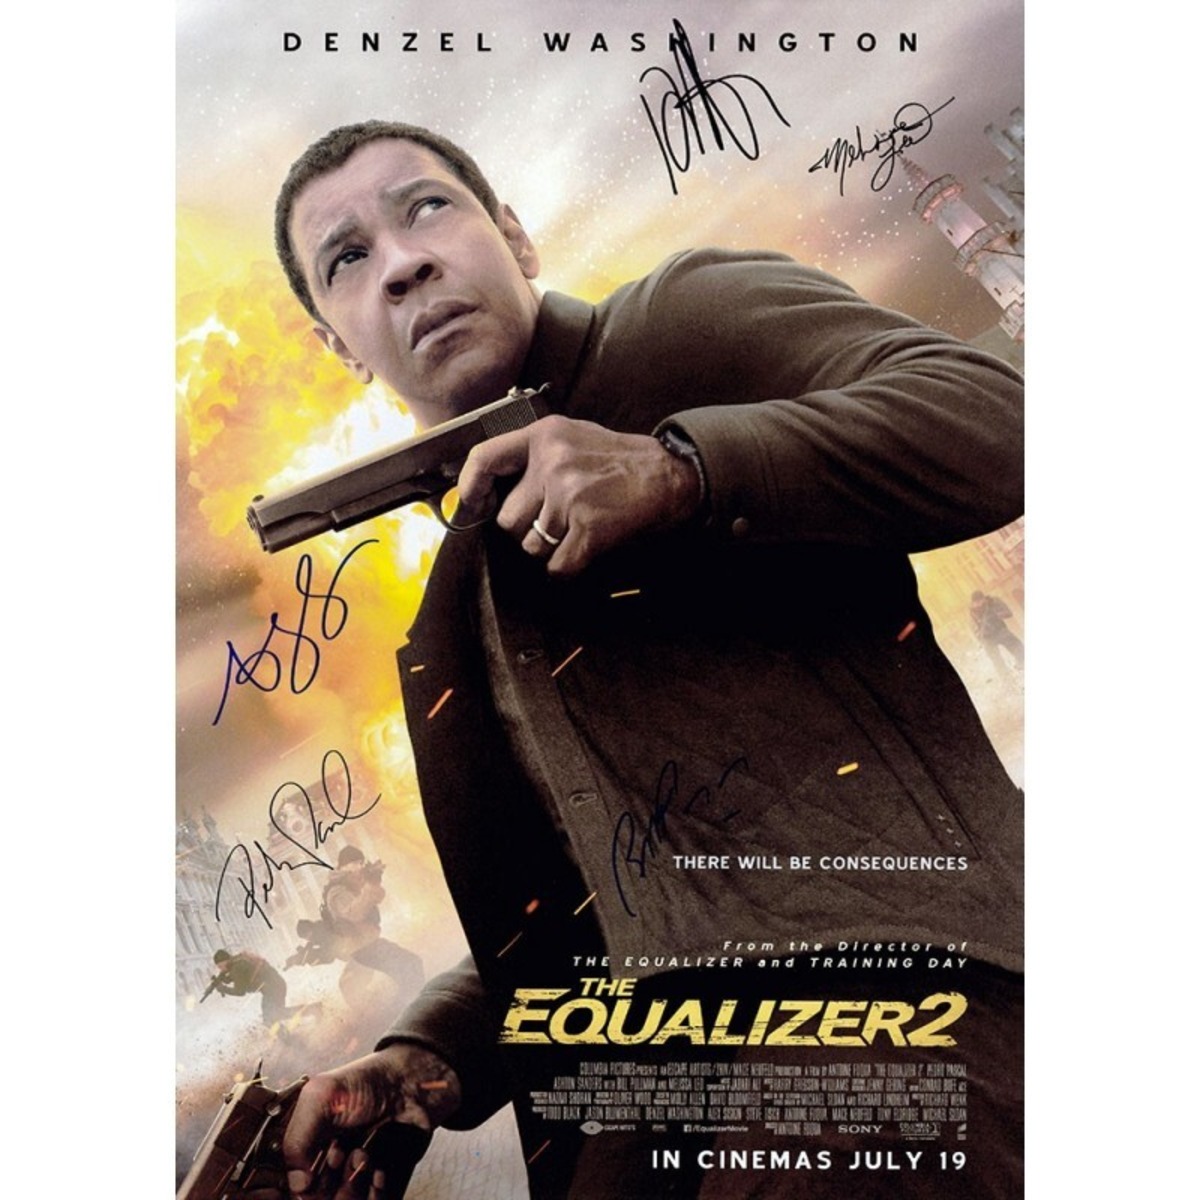 THE EQUALIZER 2(イコライザー2) 【5名直筆サイン入りミニポスター】 | searchlight